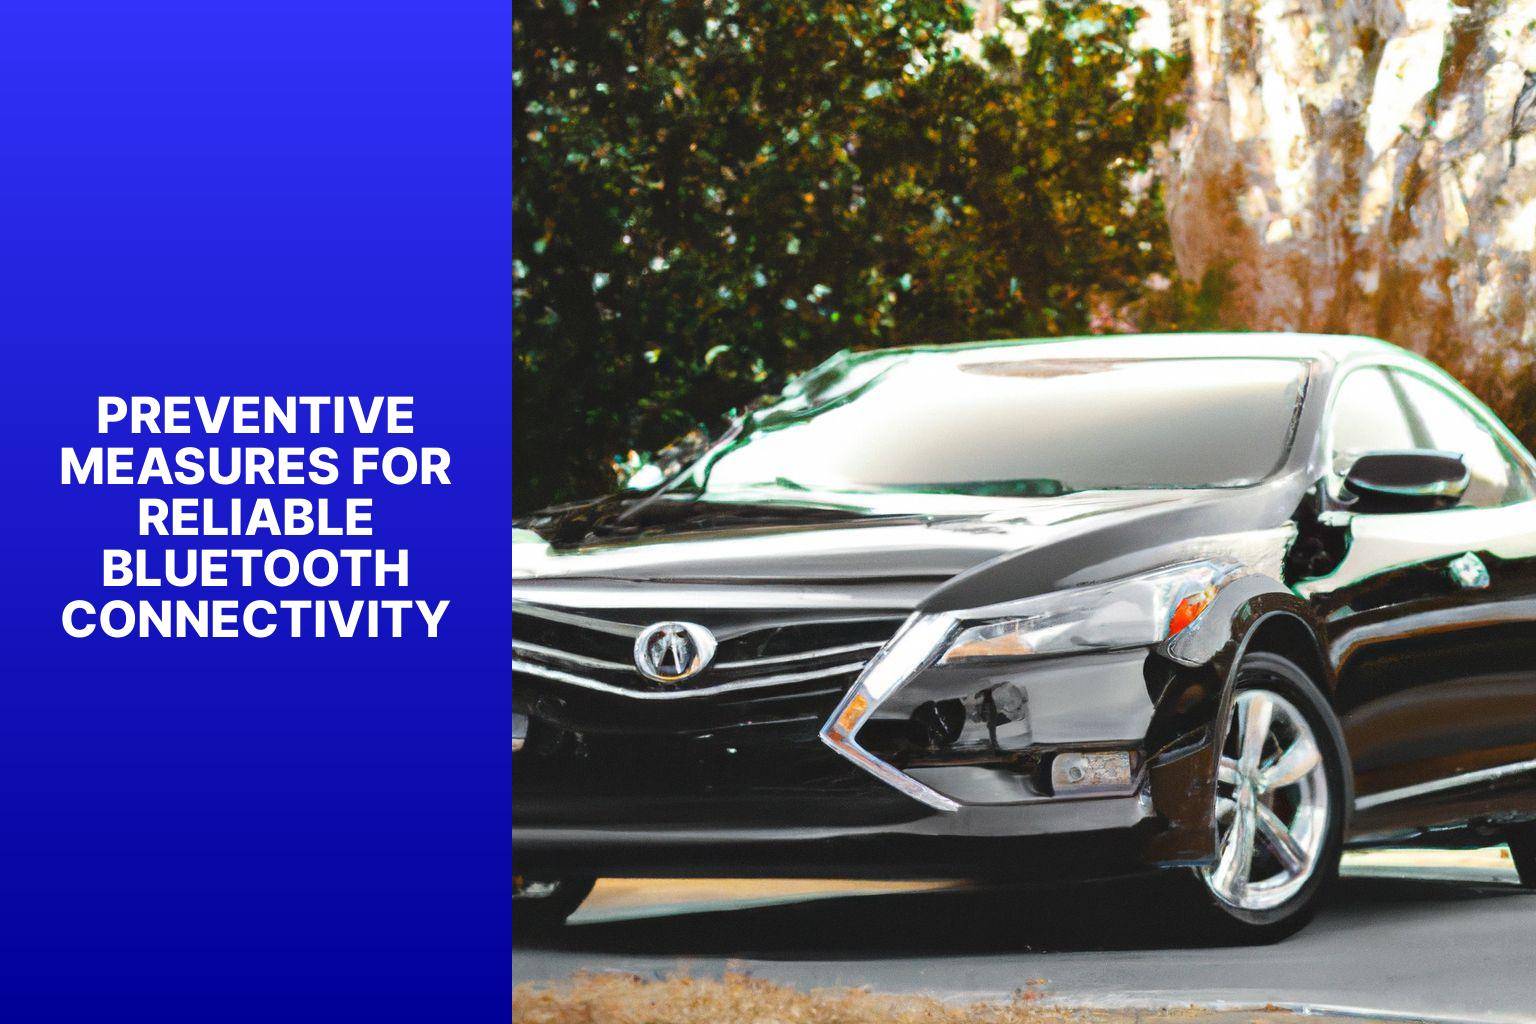 Preventive Measures for Reliable Bluetooth Connectivity - Fixing Connectivity: Troubleshooting 2018 Nissan Altima Bluetooth Issues 